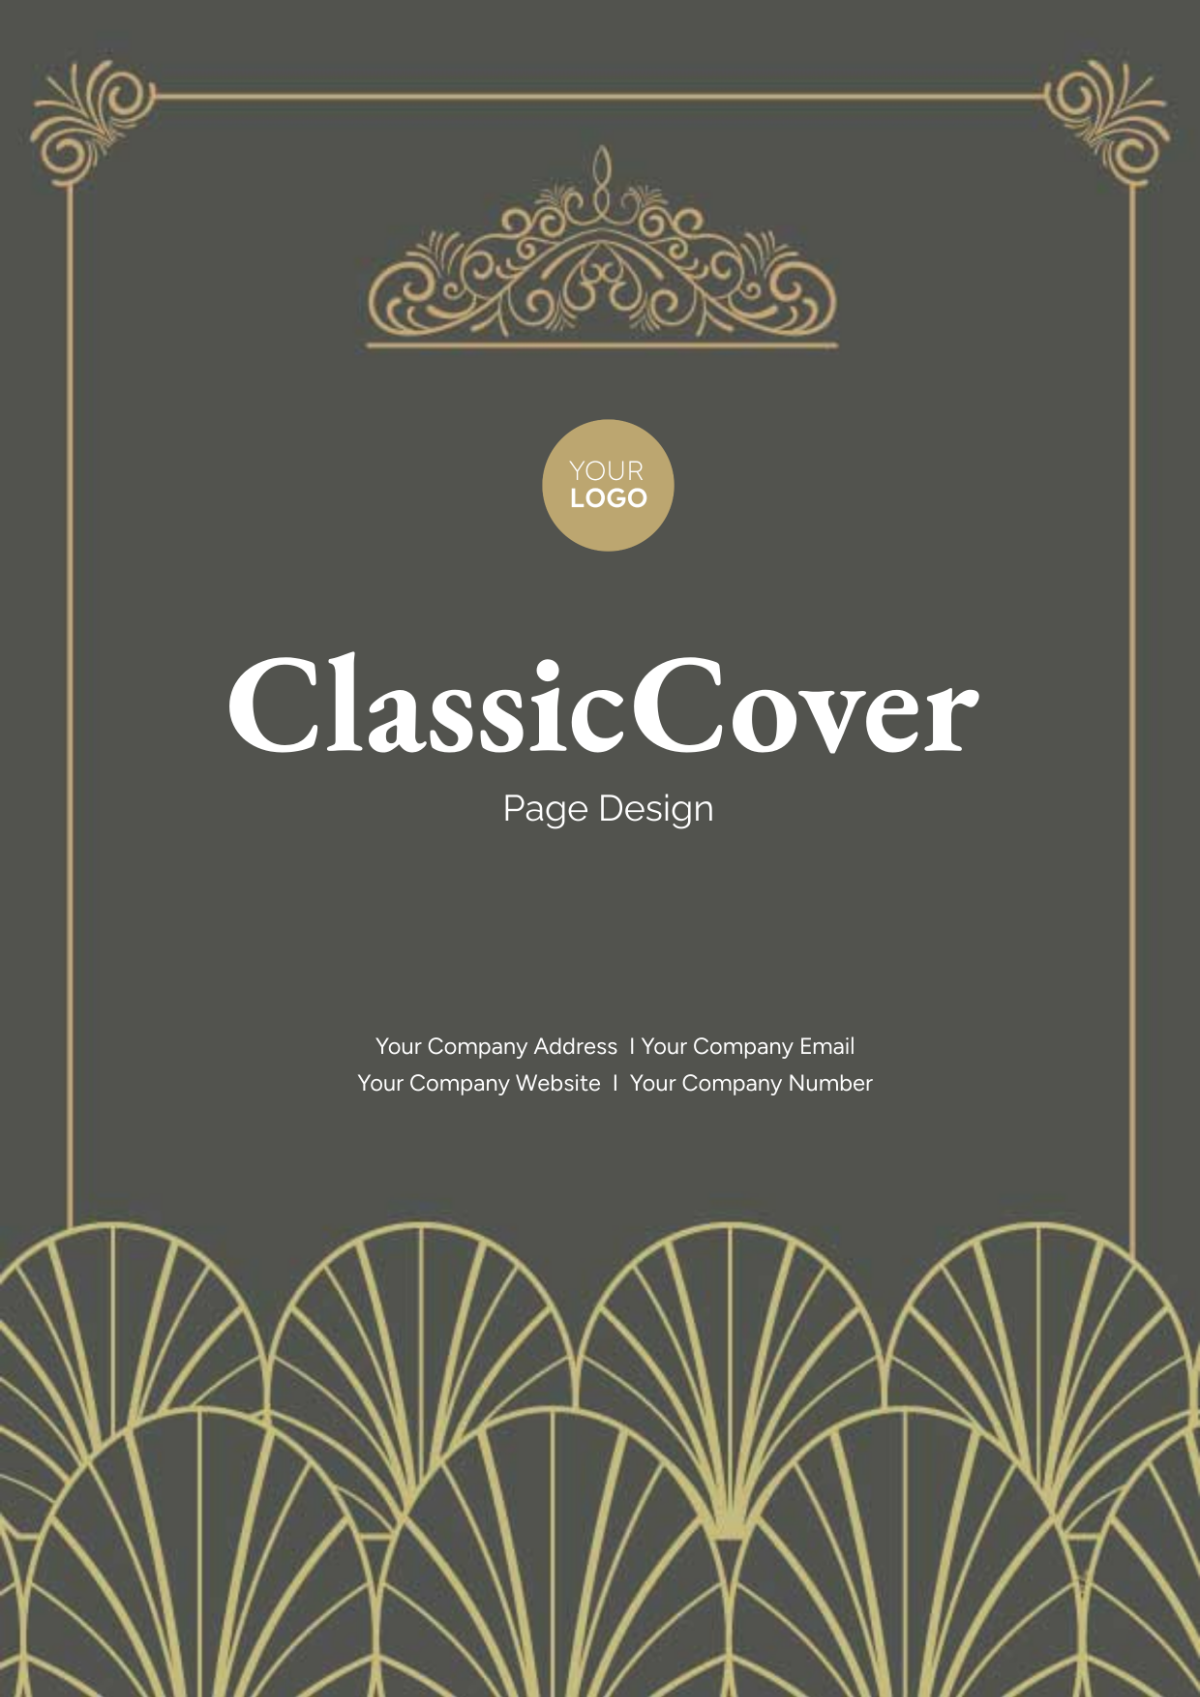 Classic Cover Page Design